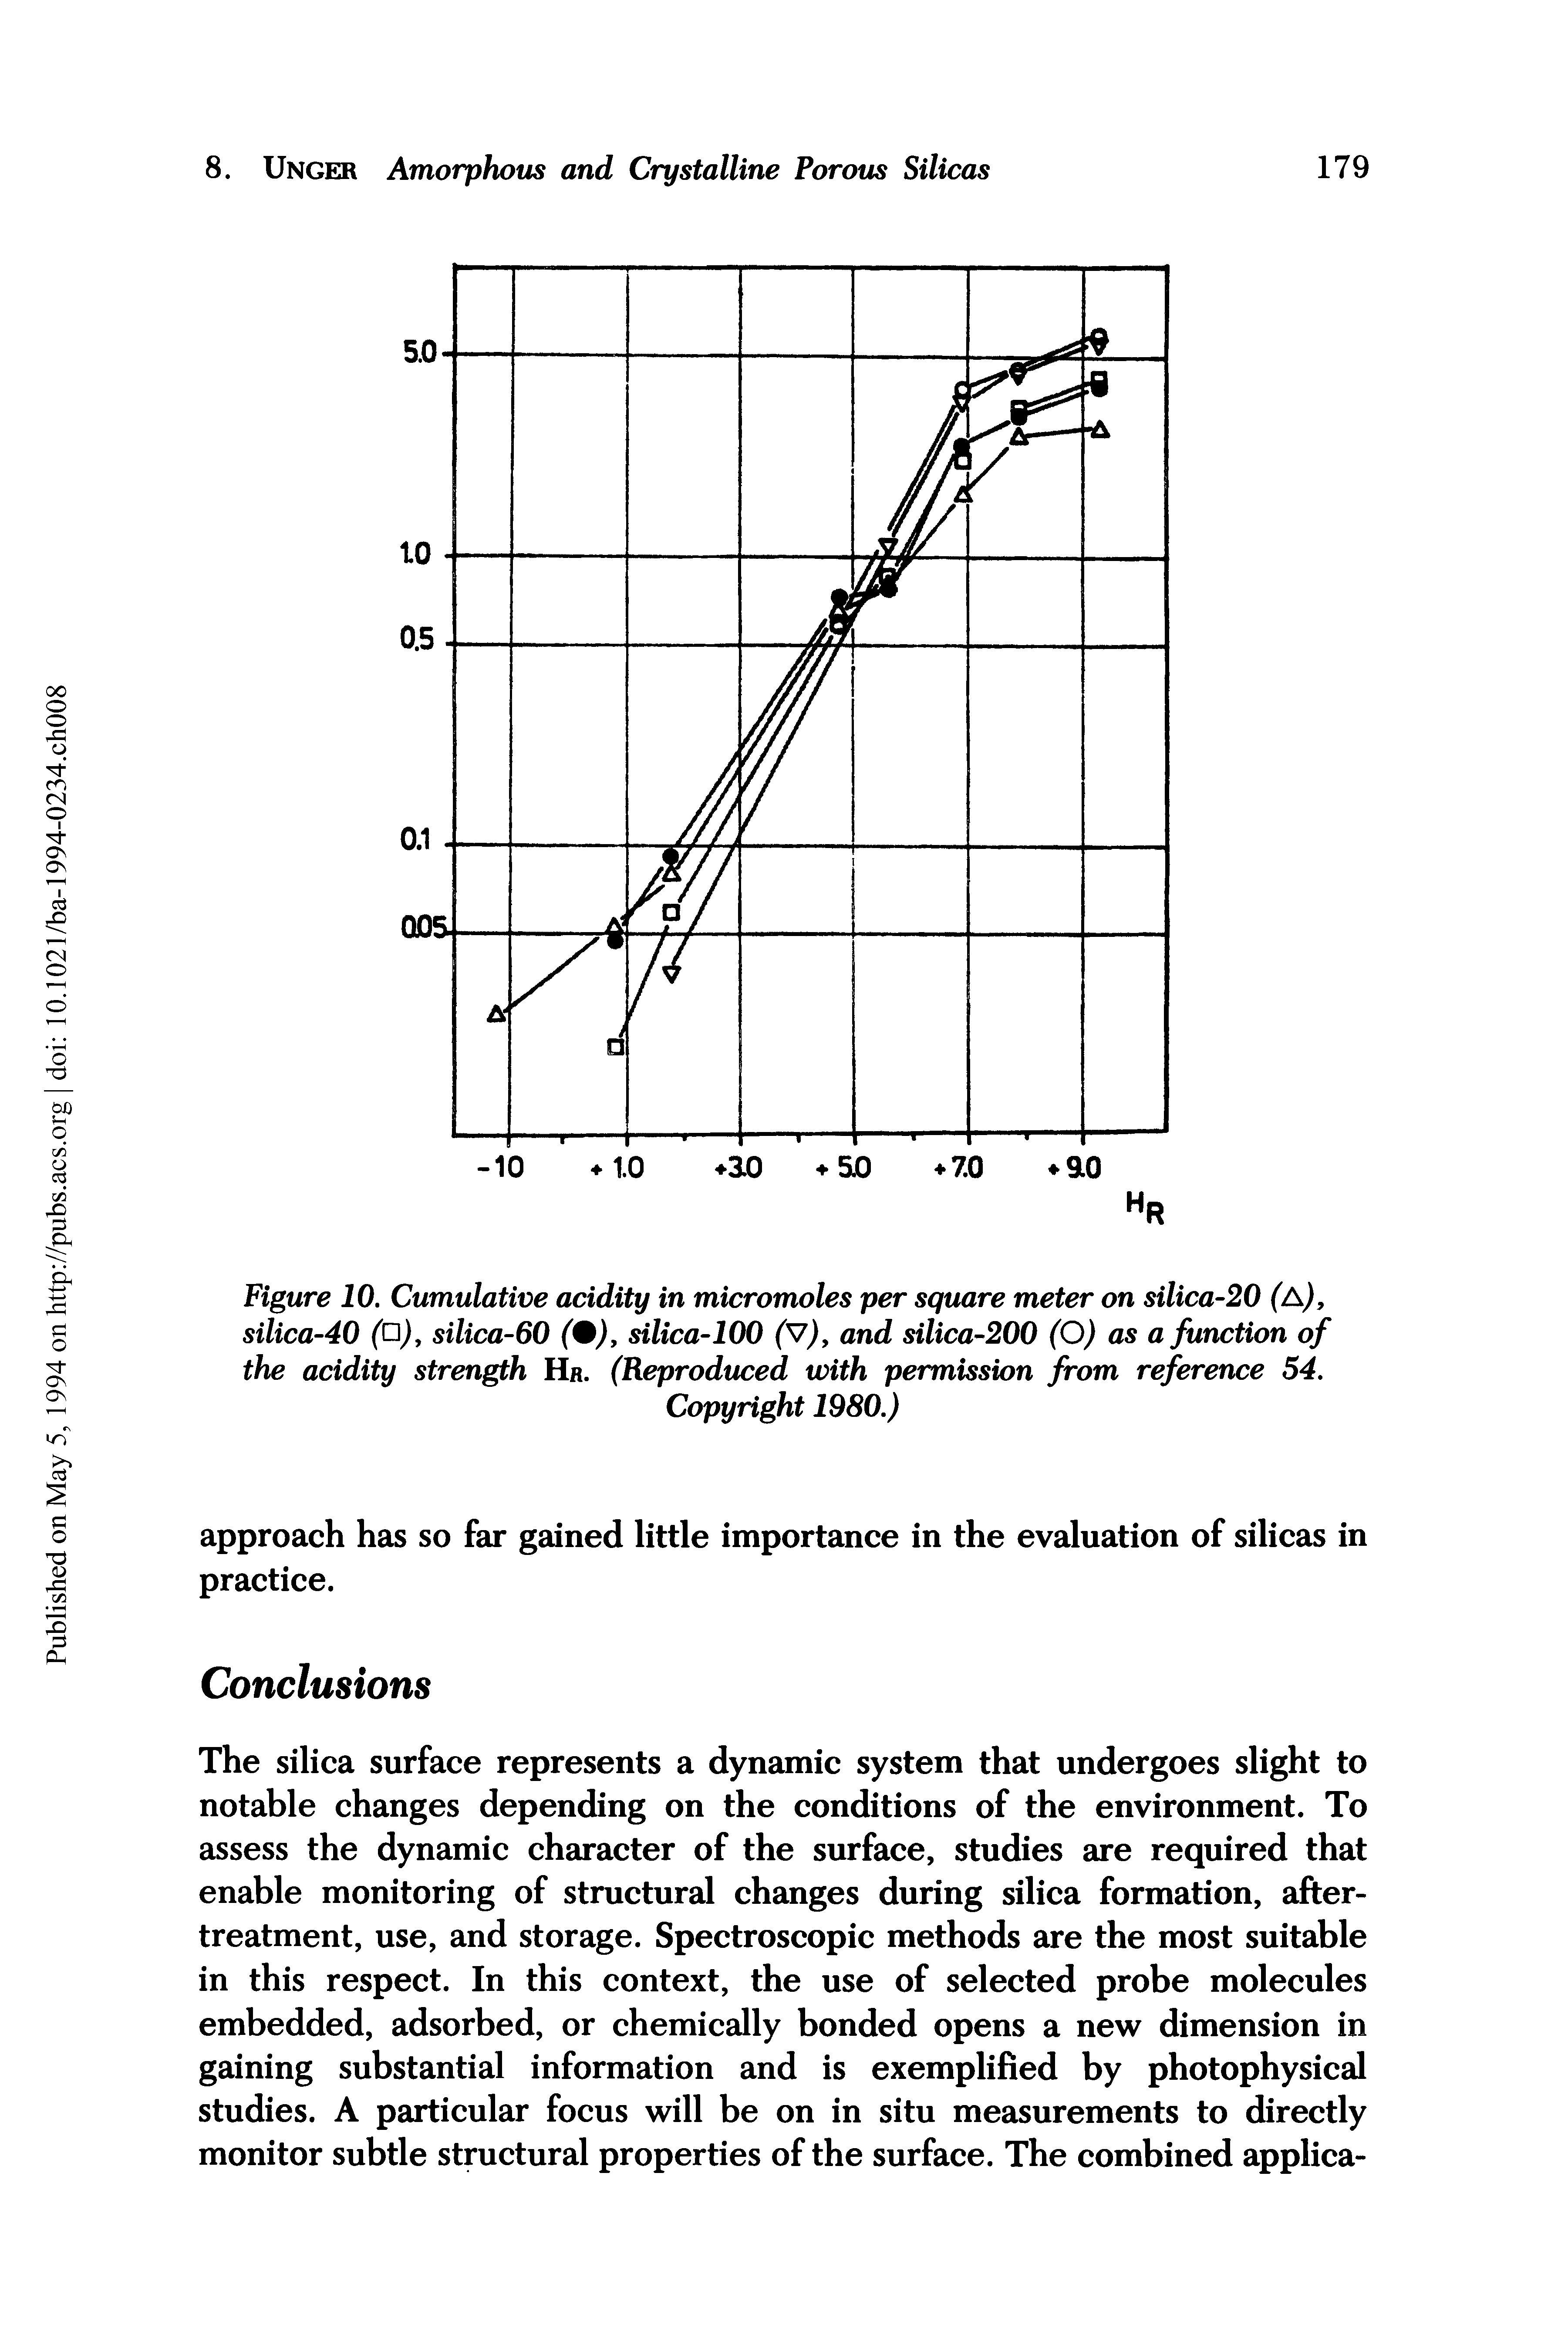 Figure 10. Cumulative acidity in micromoles per square meter on silica-20 (A), silica-40 silica-60 (%), silica-100 (V), and silica-200 (O) as a function of the acidity strength Hr. (Reproduced with permission from reference 54.